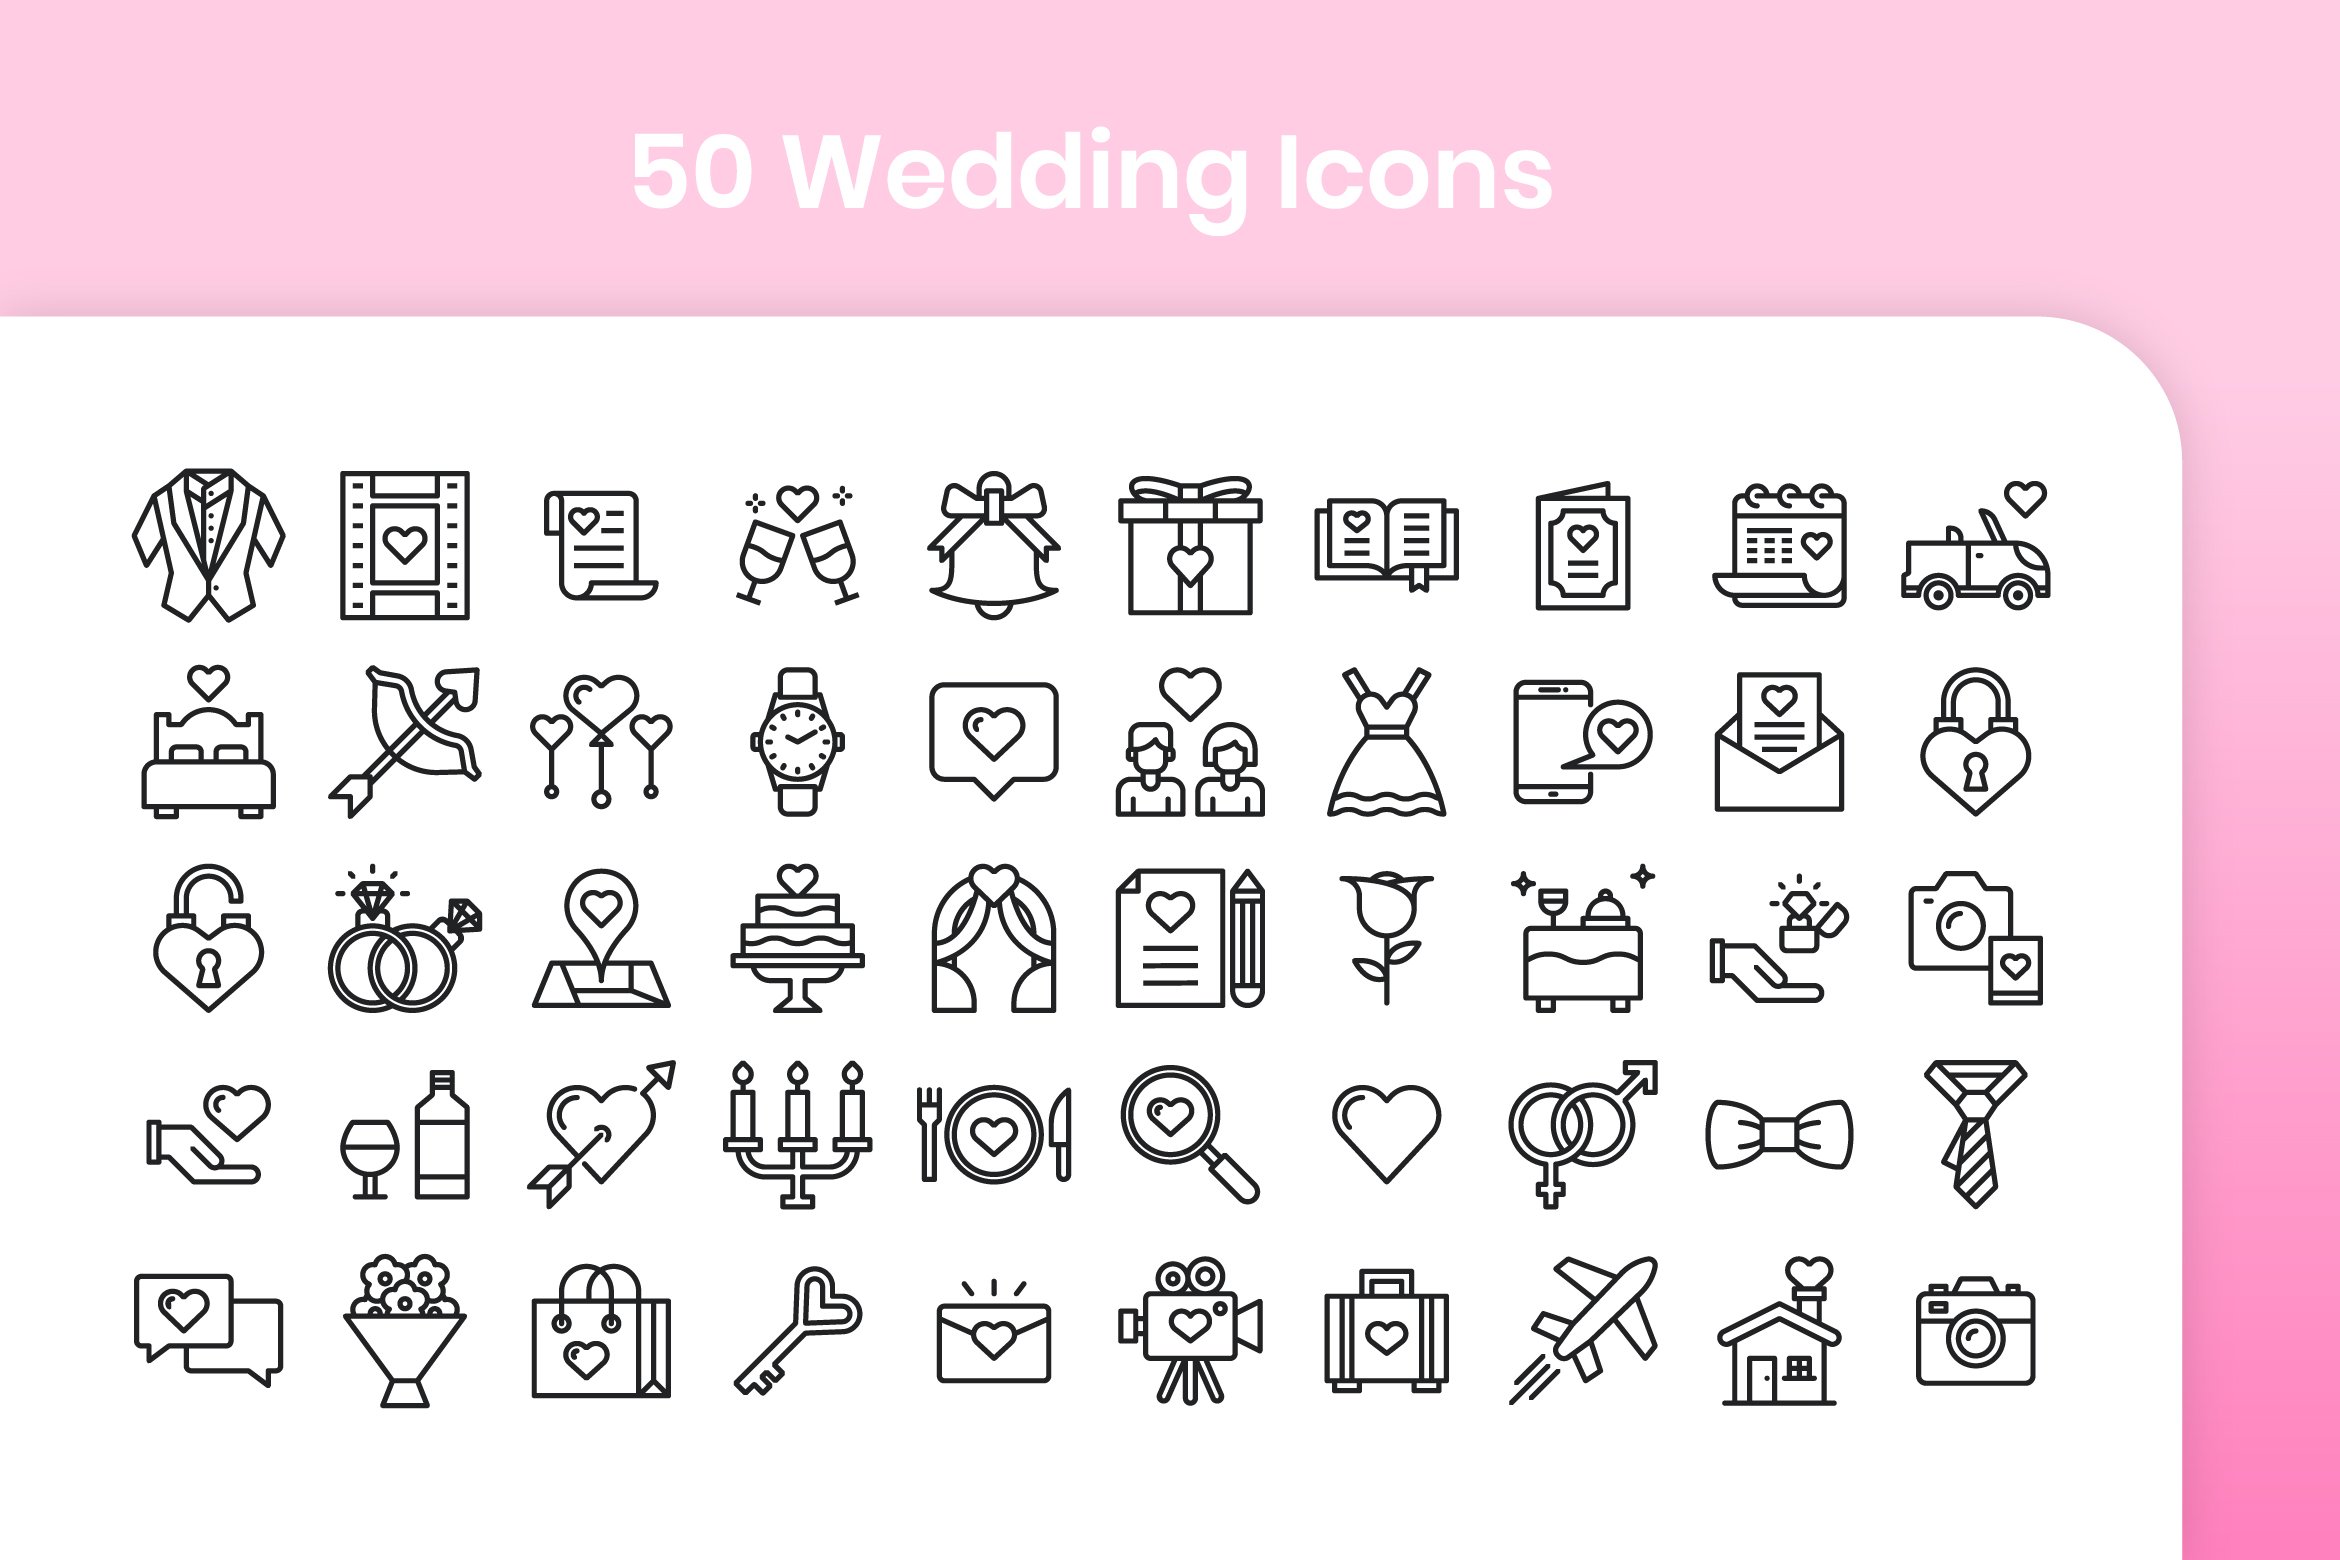 50 Wedding - Line preview image.